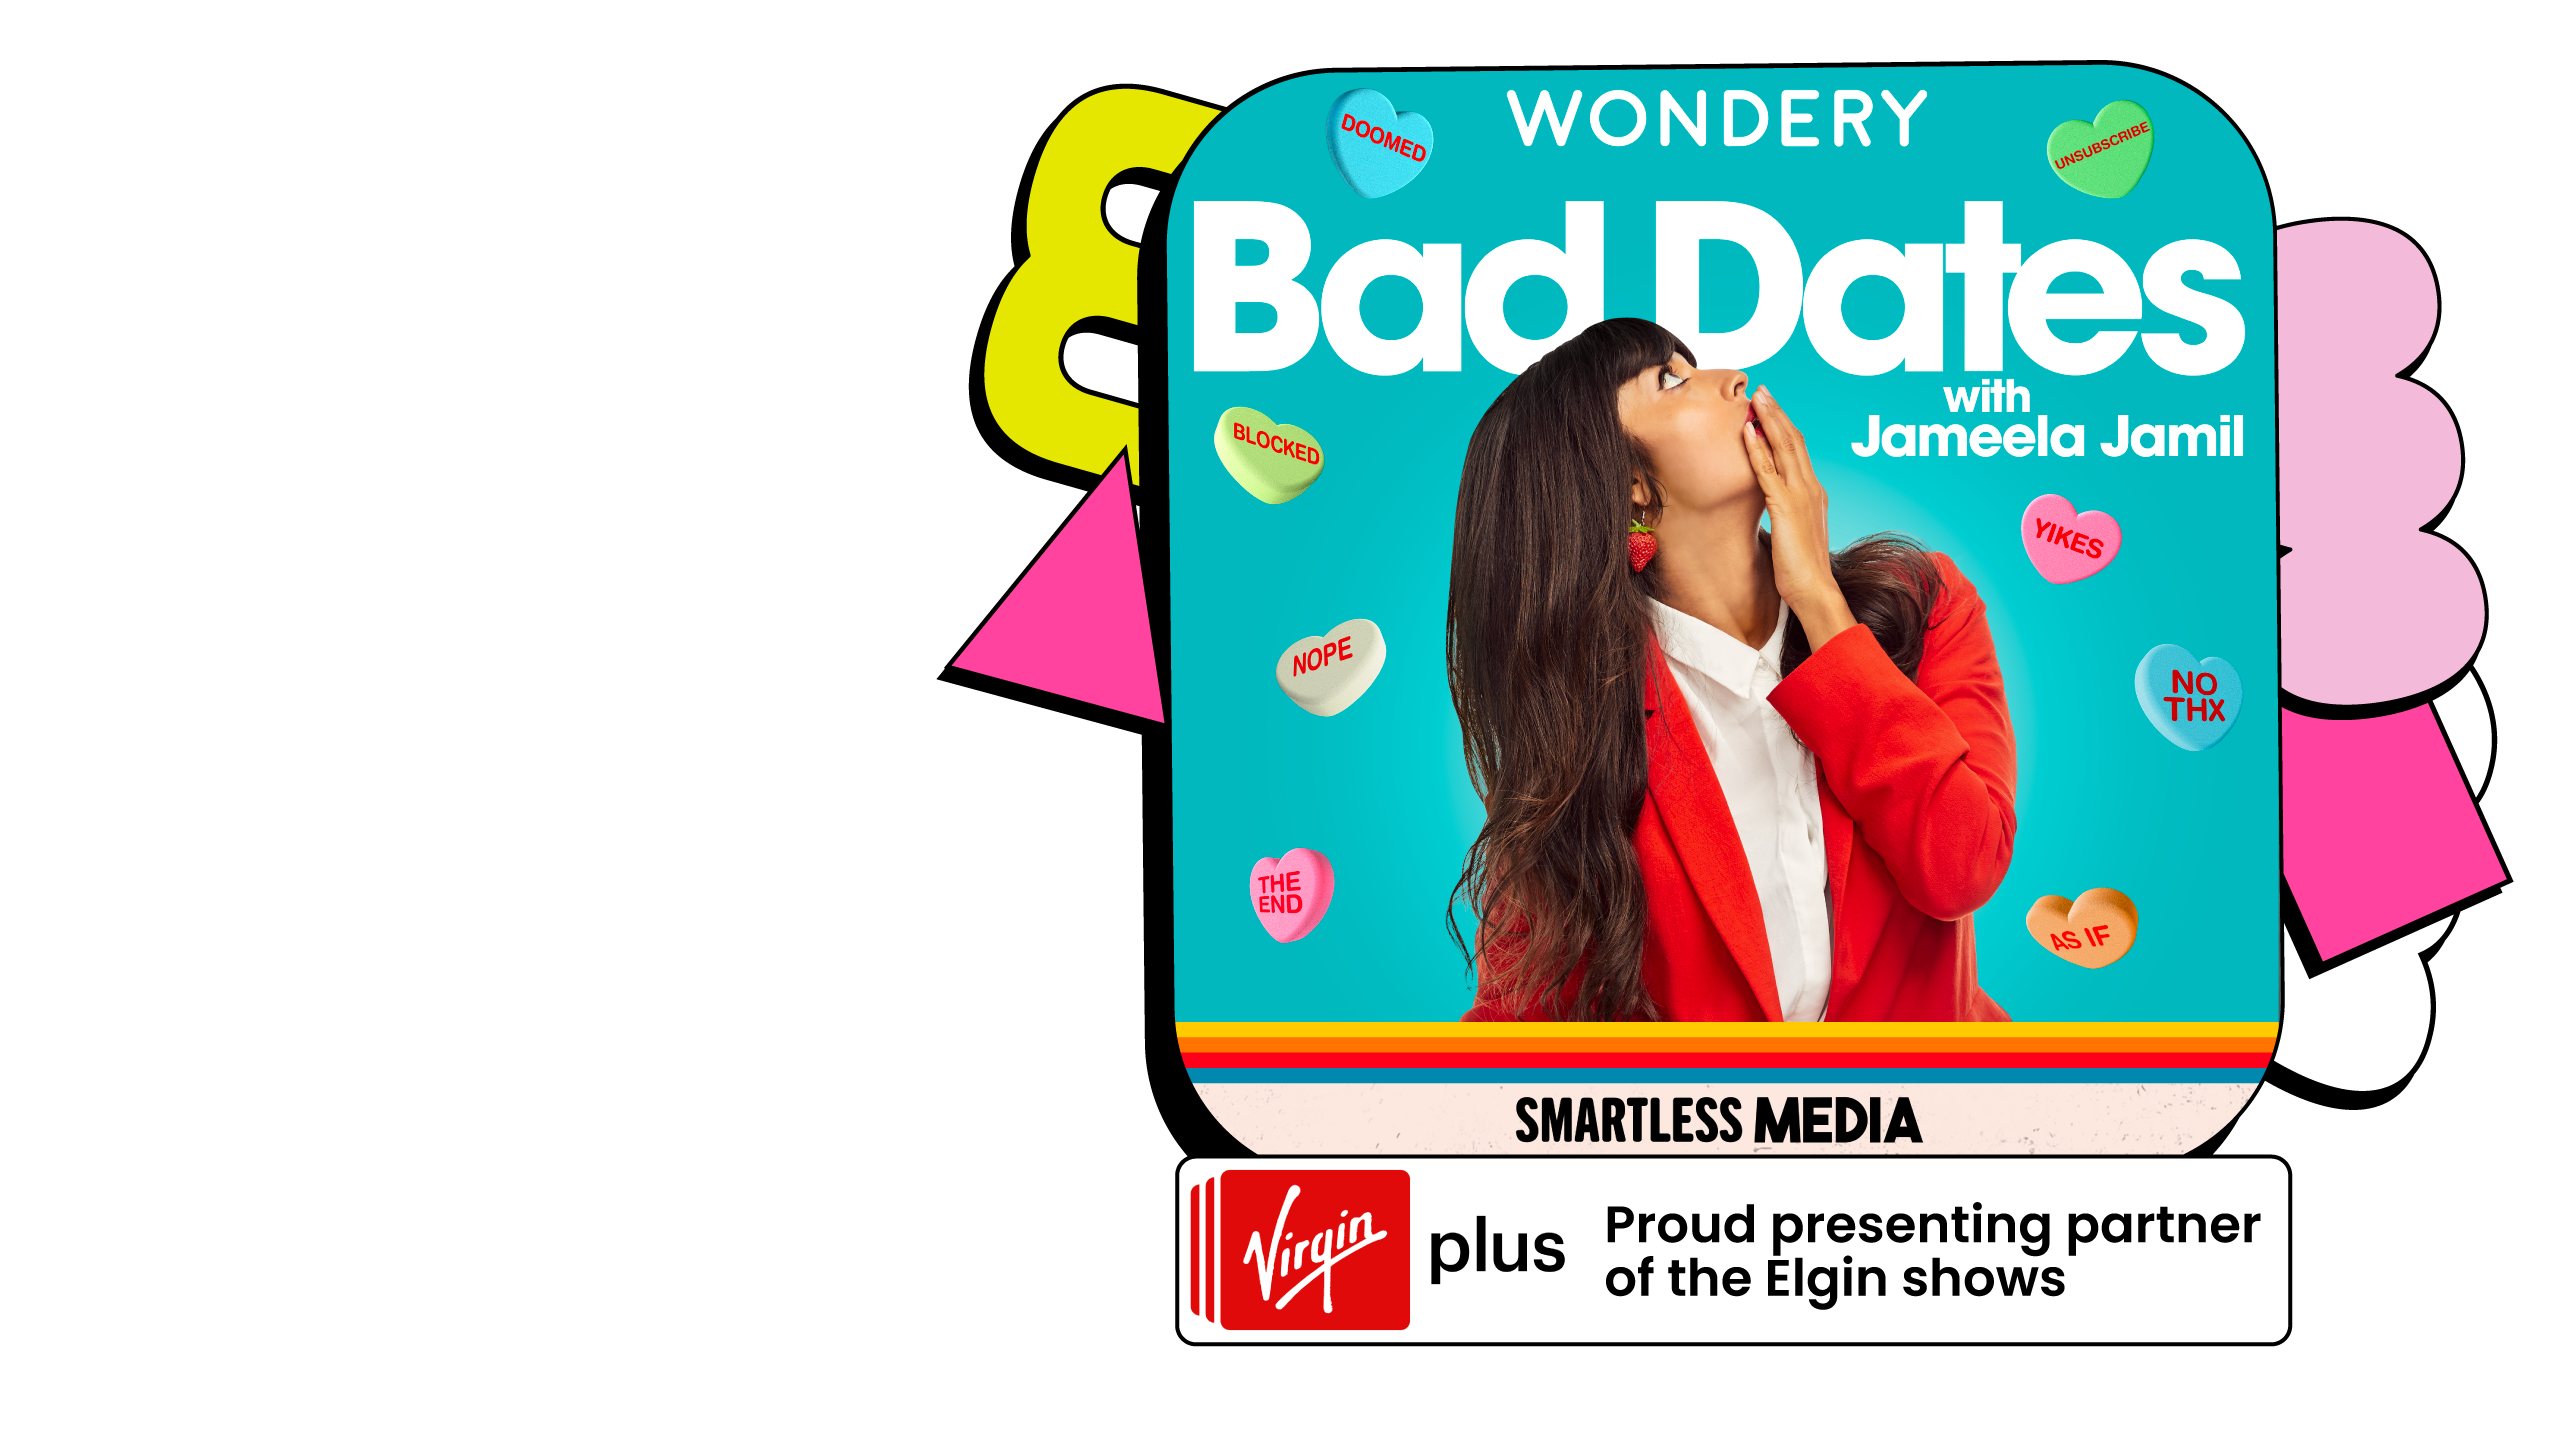 Promotional image for Bad Dates with Jameela Jamil